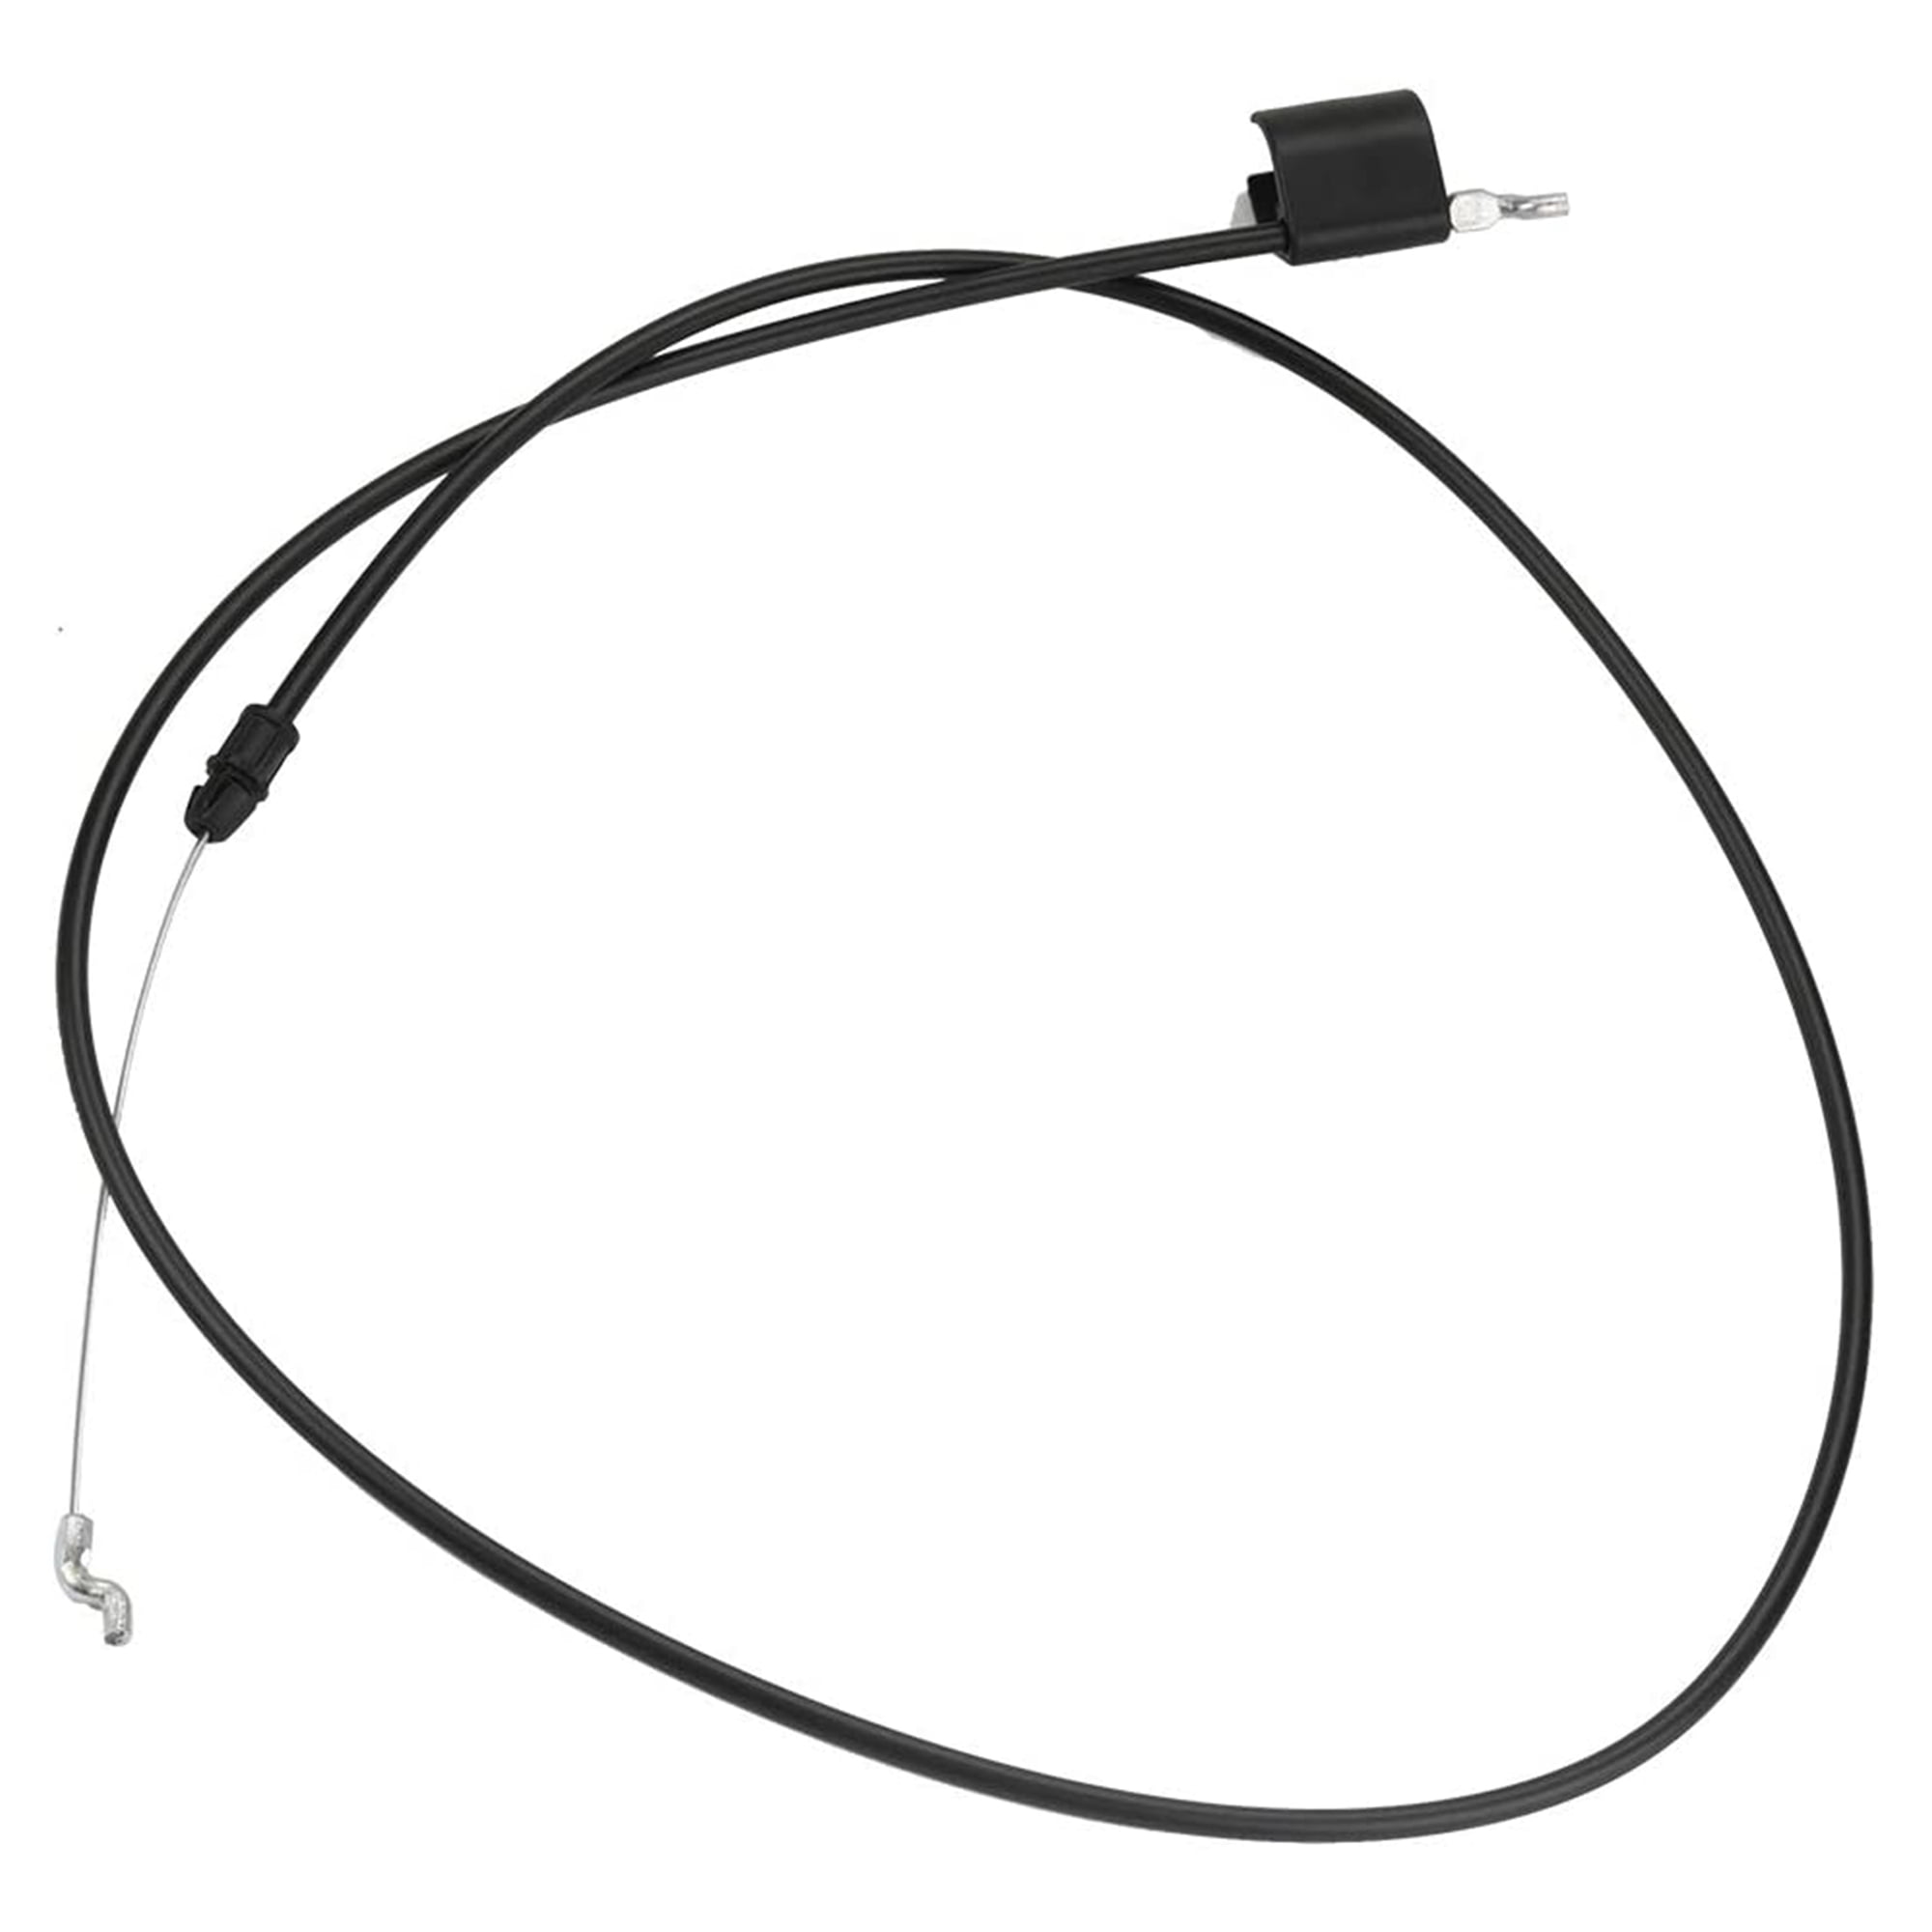 PMS-946-1132 Details about   Control Cable for MTD Walk Behind Lawn Mower 290-851 12A-529S290 